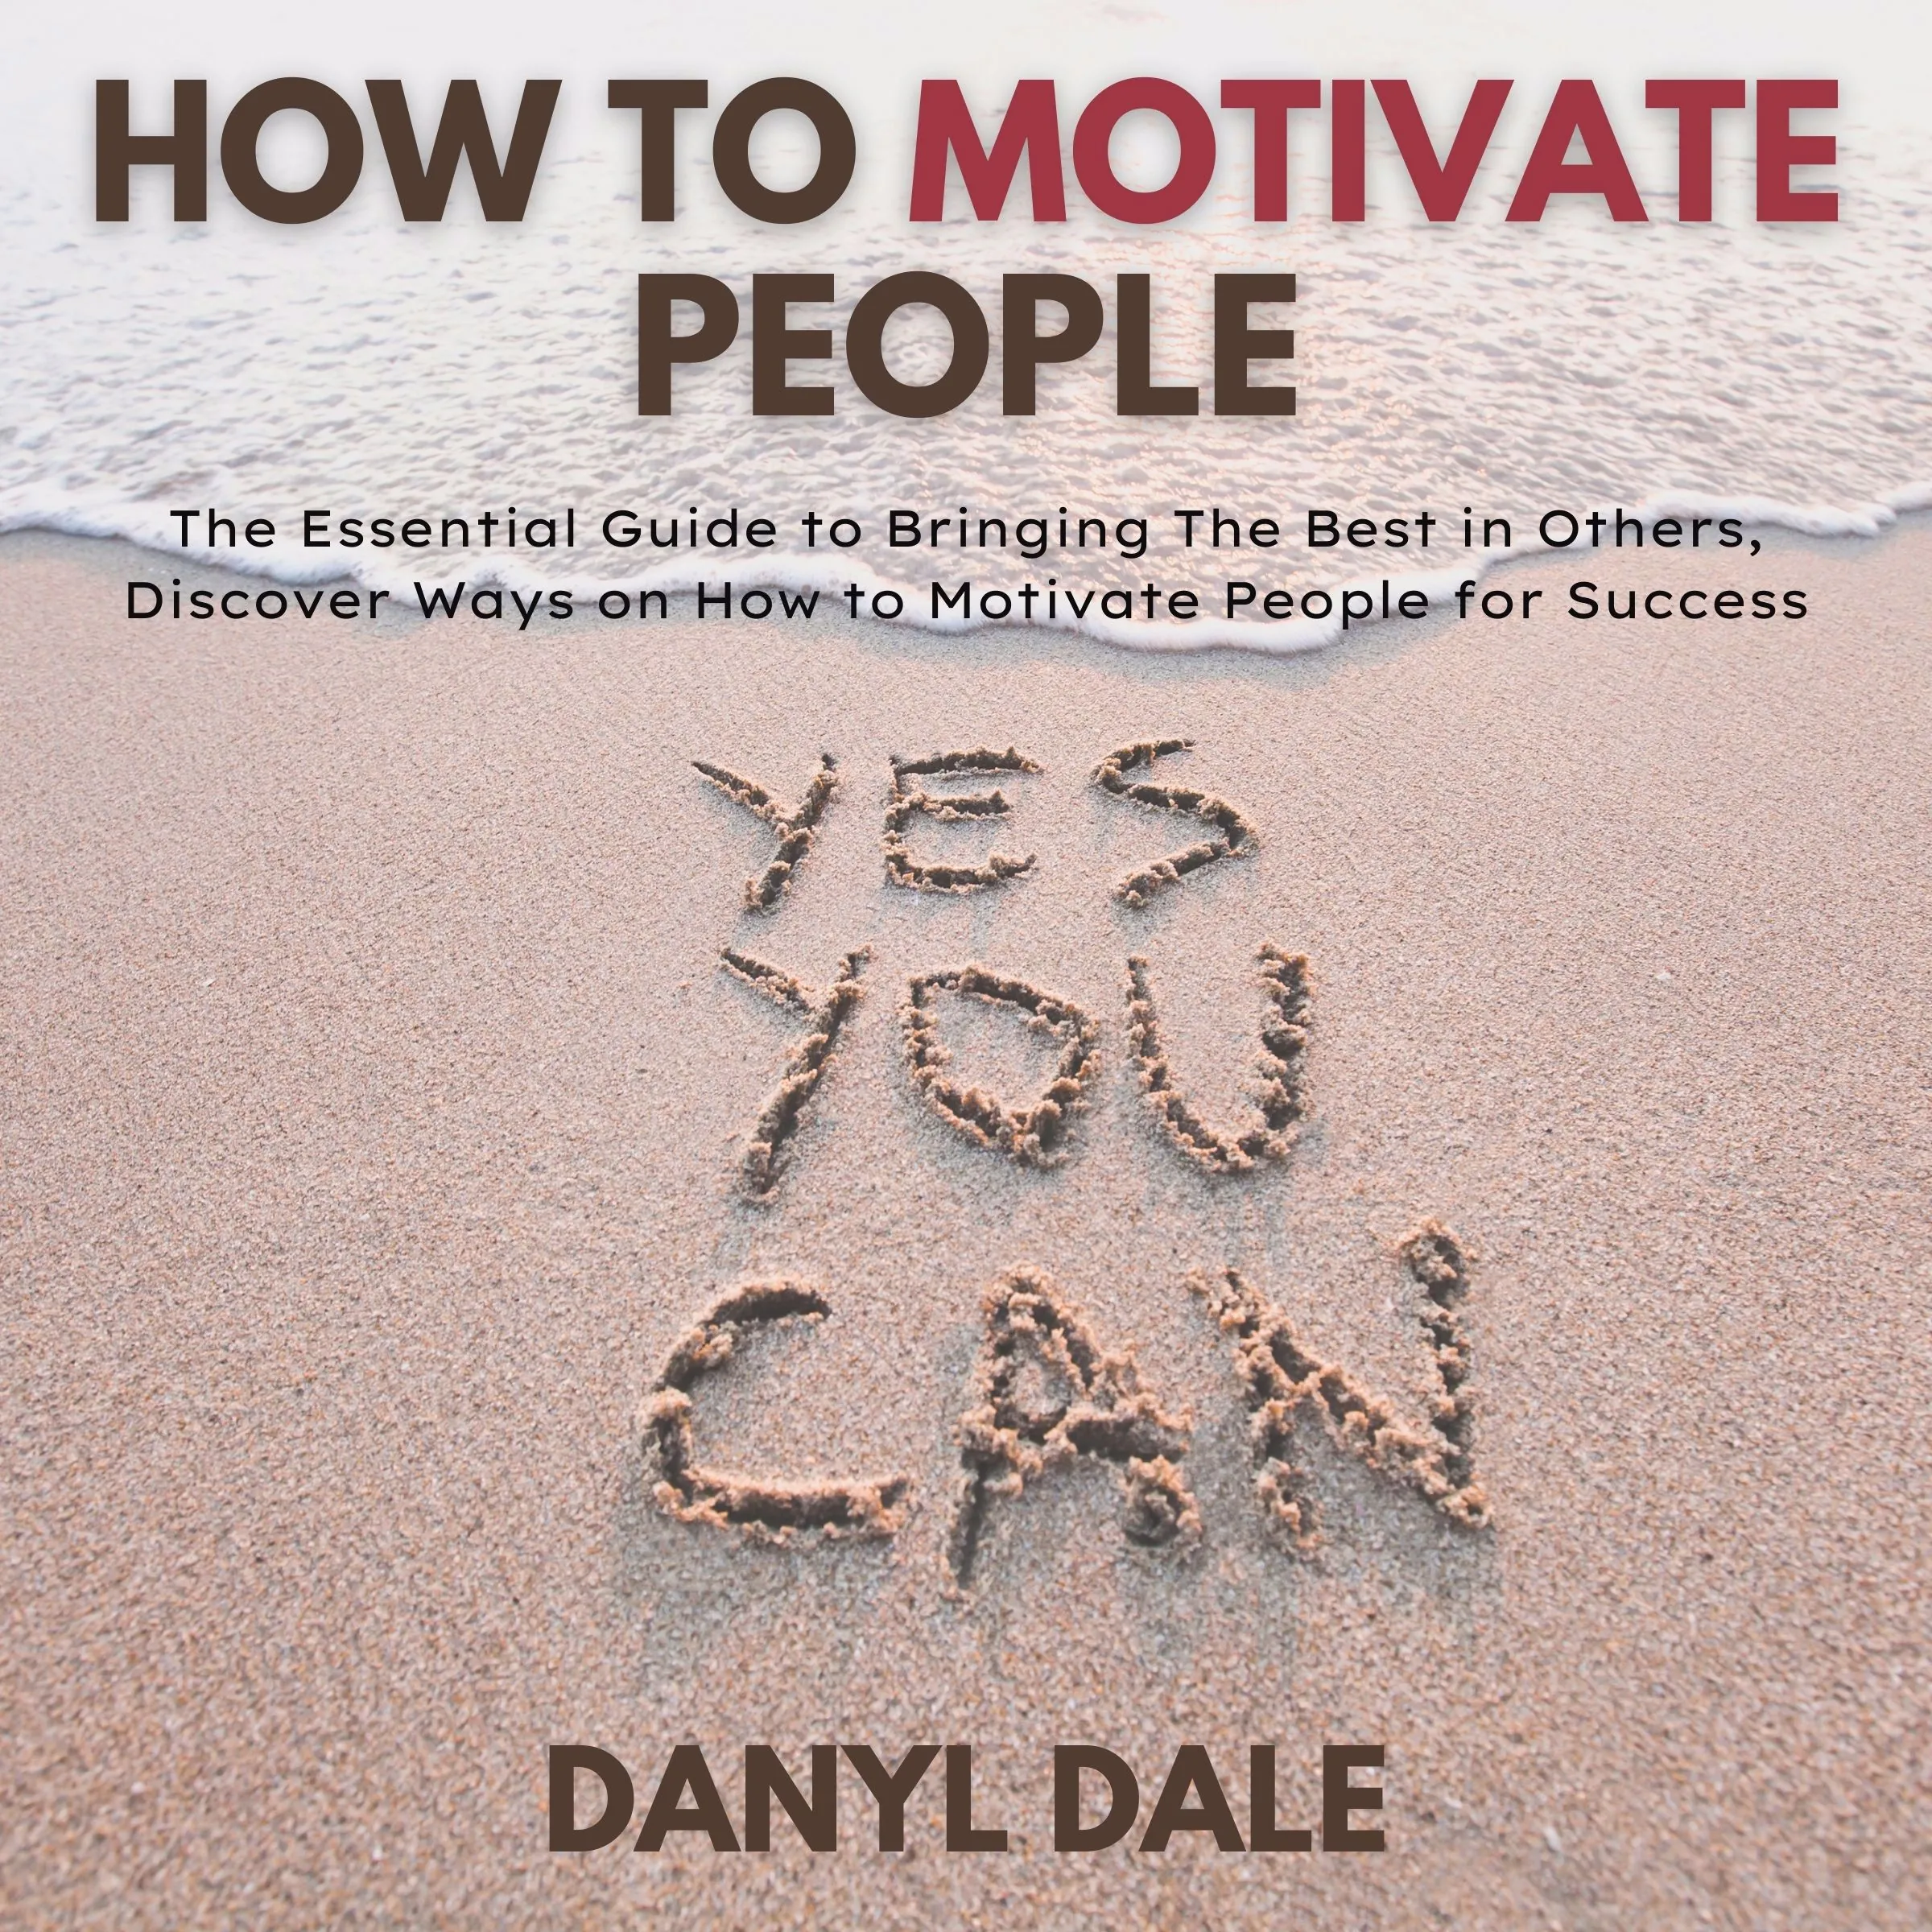 How To Motivate People Audiobook by Danyl Dale